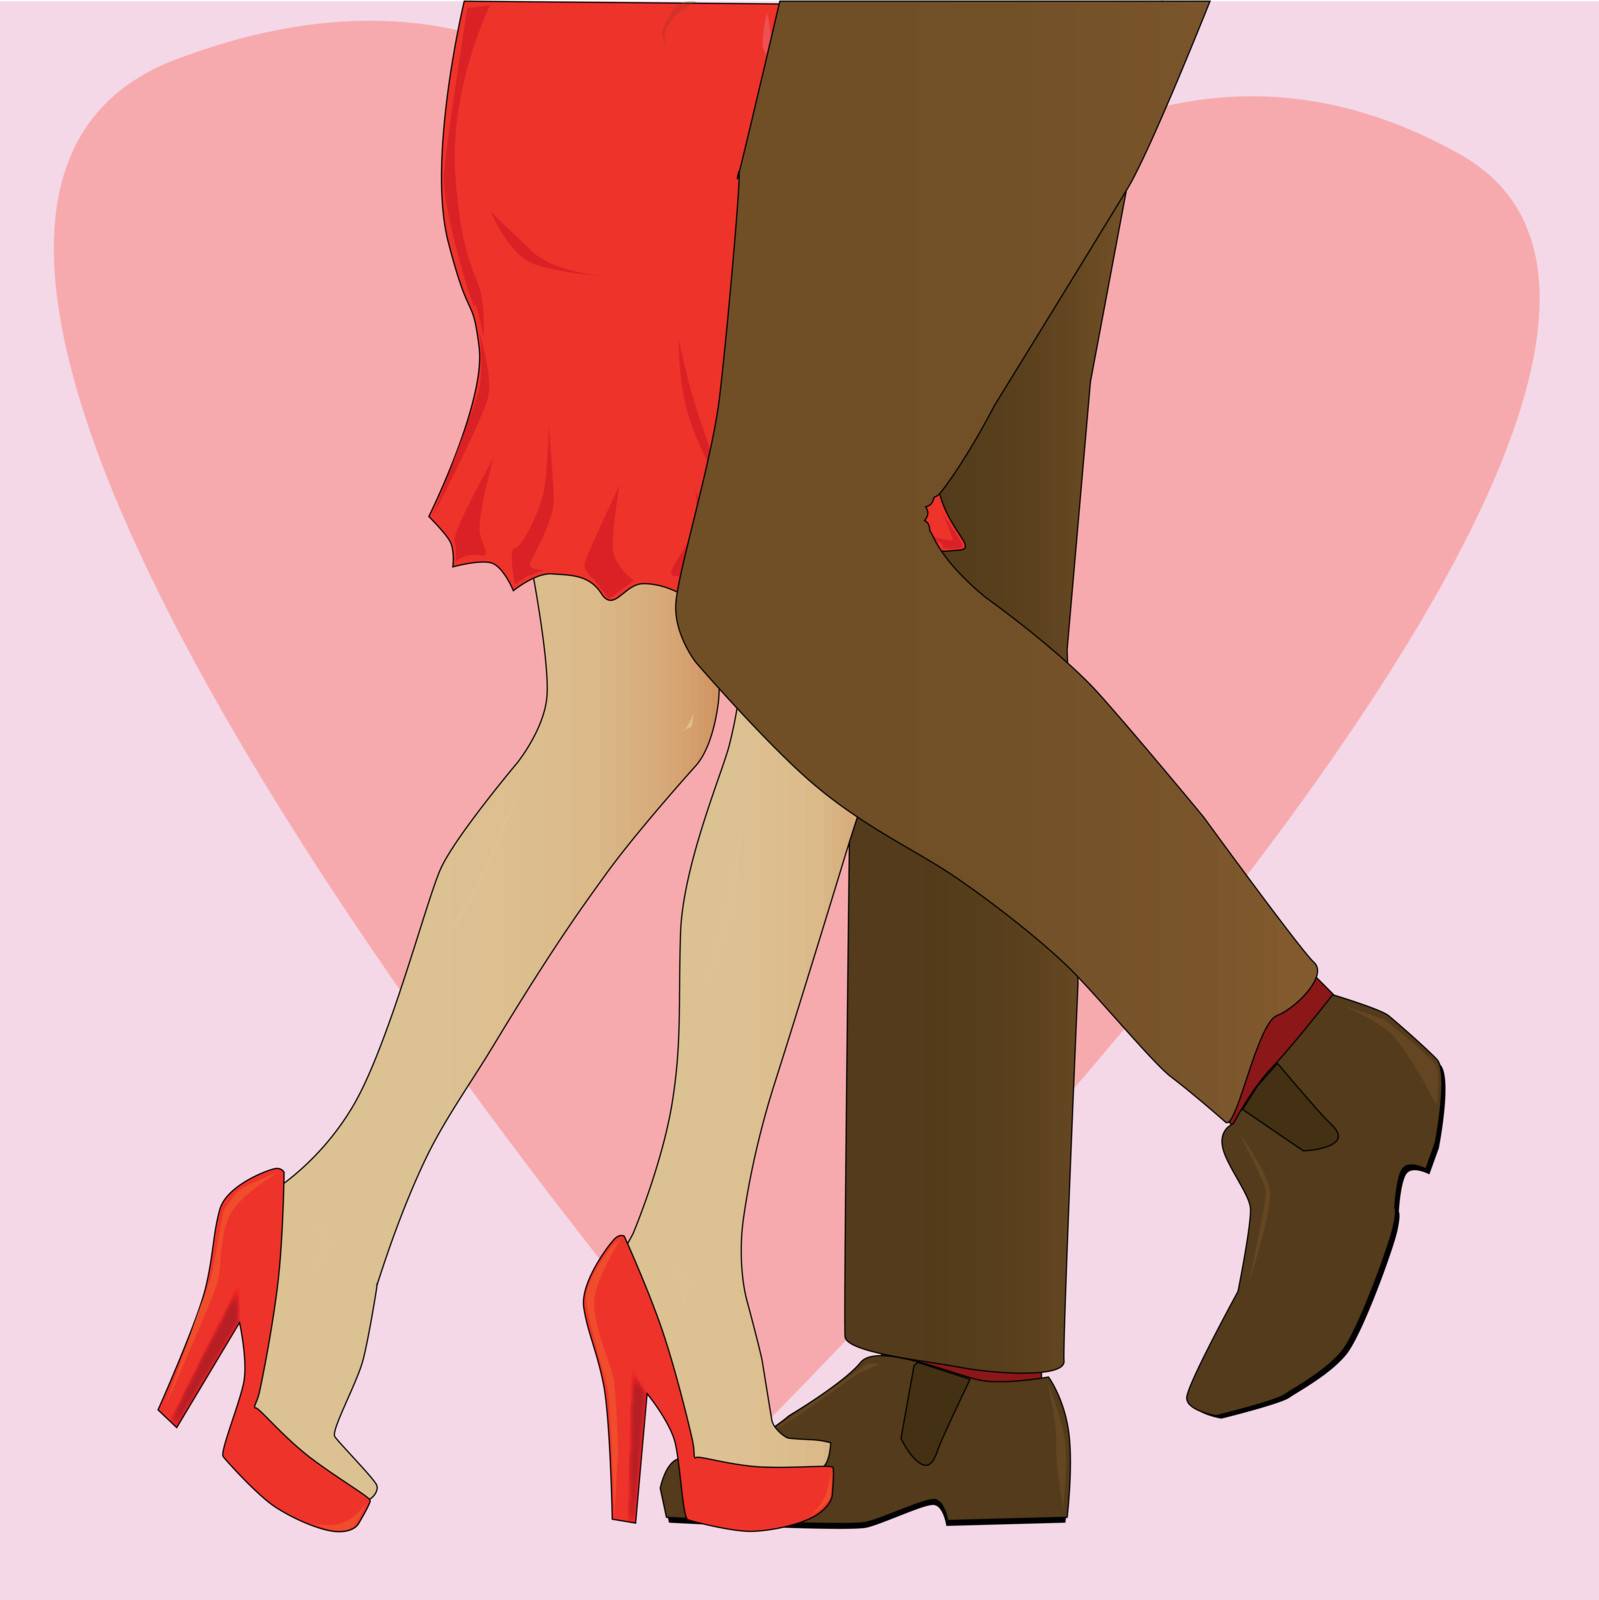 A man and womans legs dancing backdroped by a large heart and pink background.